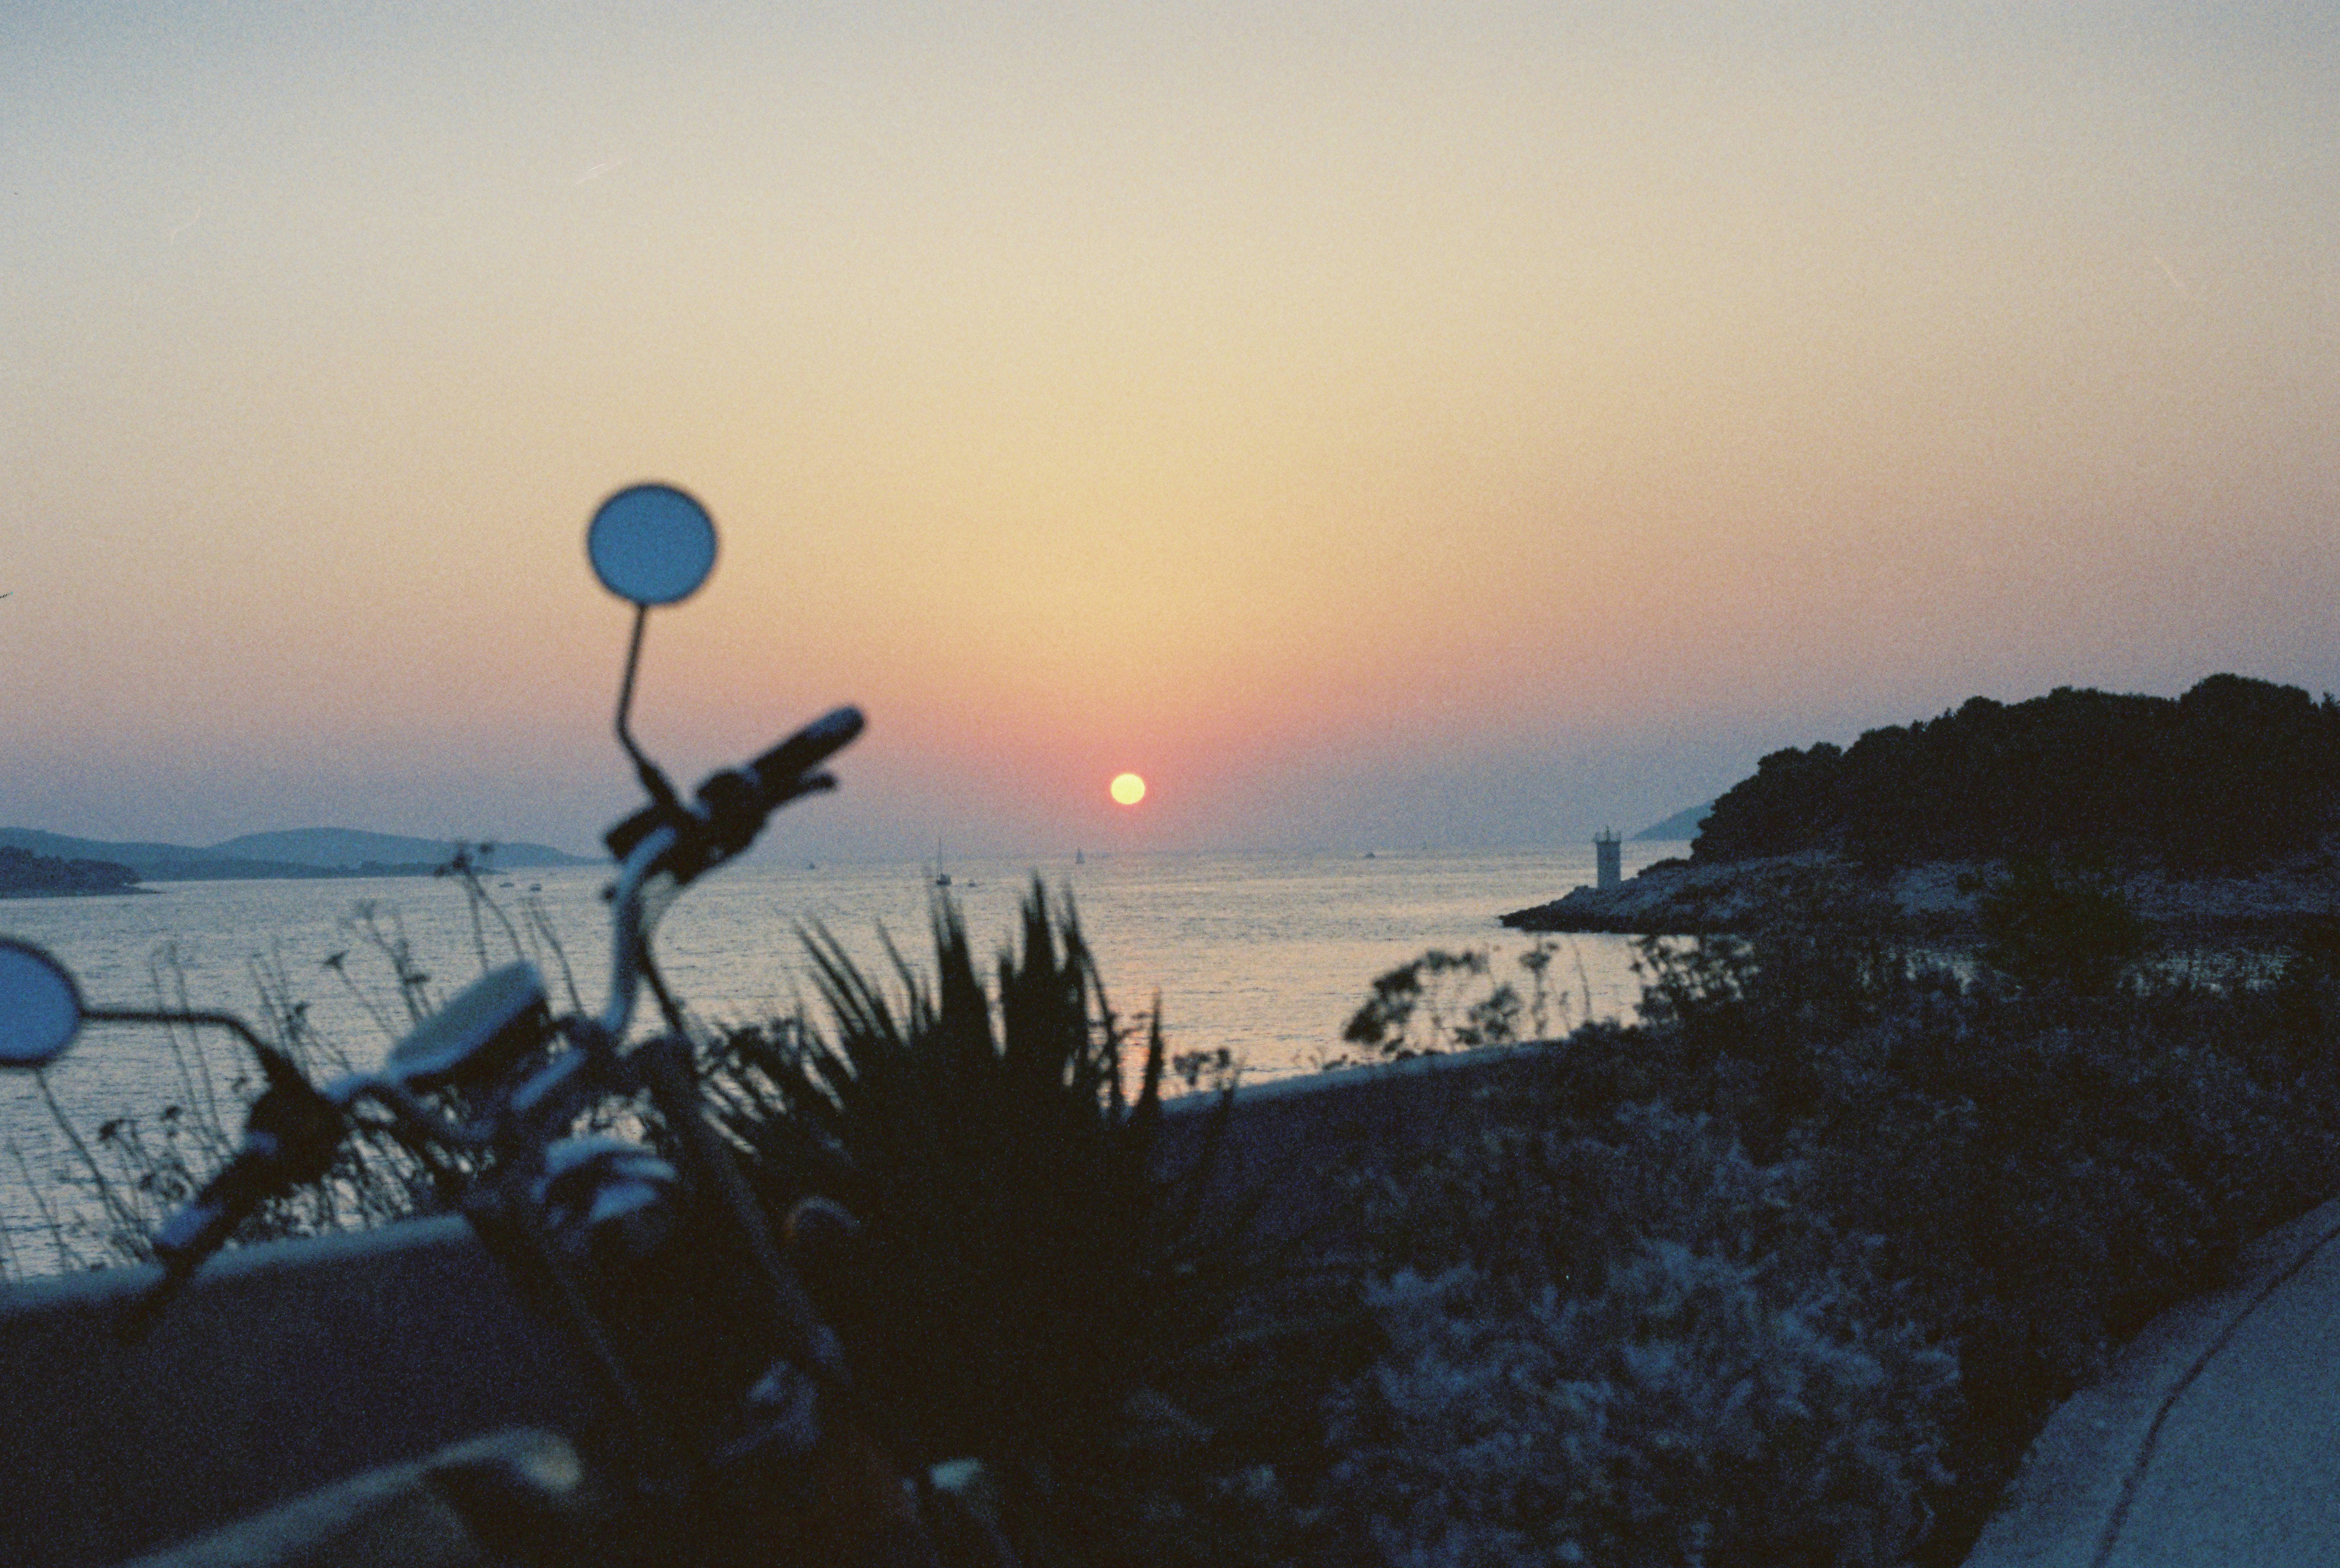 I've carried this custom film around with me for a couple of moths, trying to find the best moment to use it (it was a film from a big roll of Tungsten 1600, cropped for a 35mm camera). And I encountered this first chance on that evening of August, witnessing this beautiful sunset over the sea. It feels like the end of an adventure and a season.